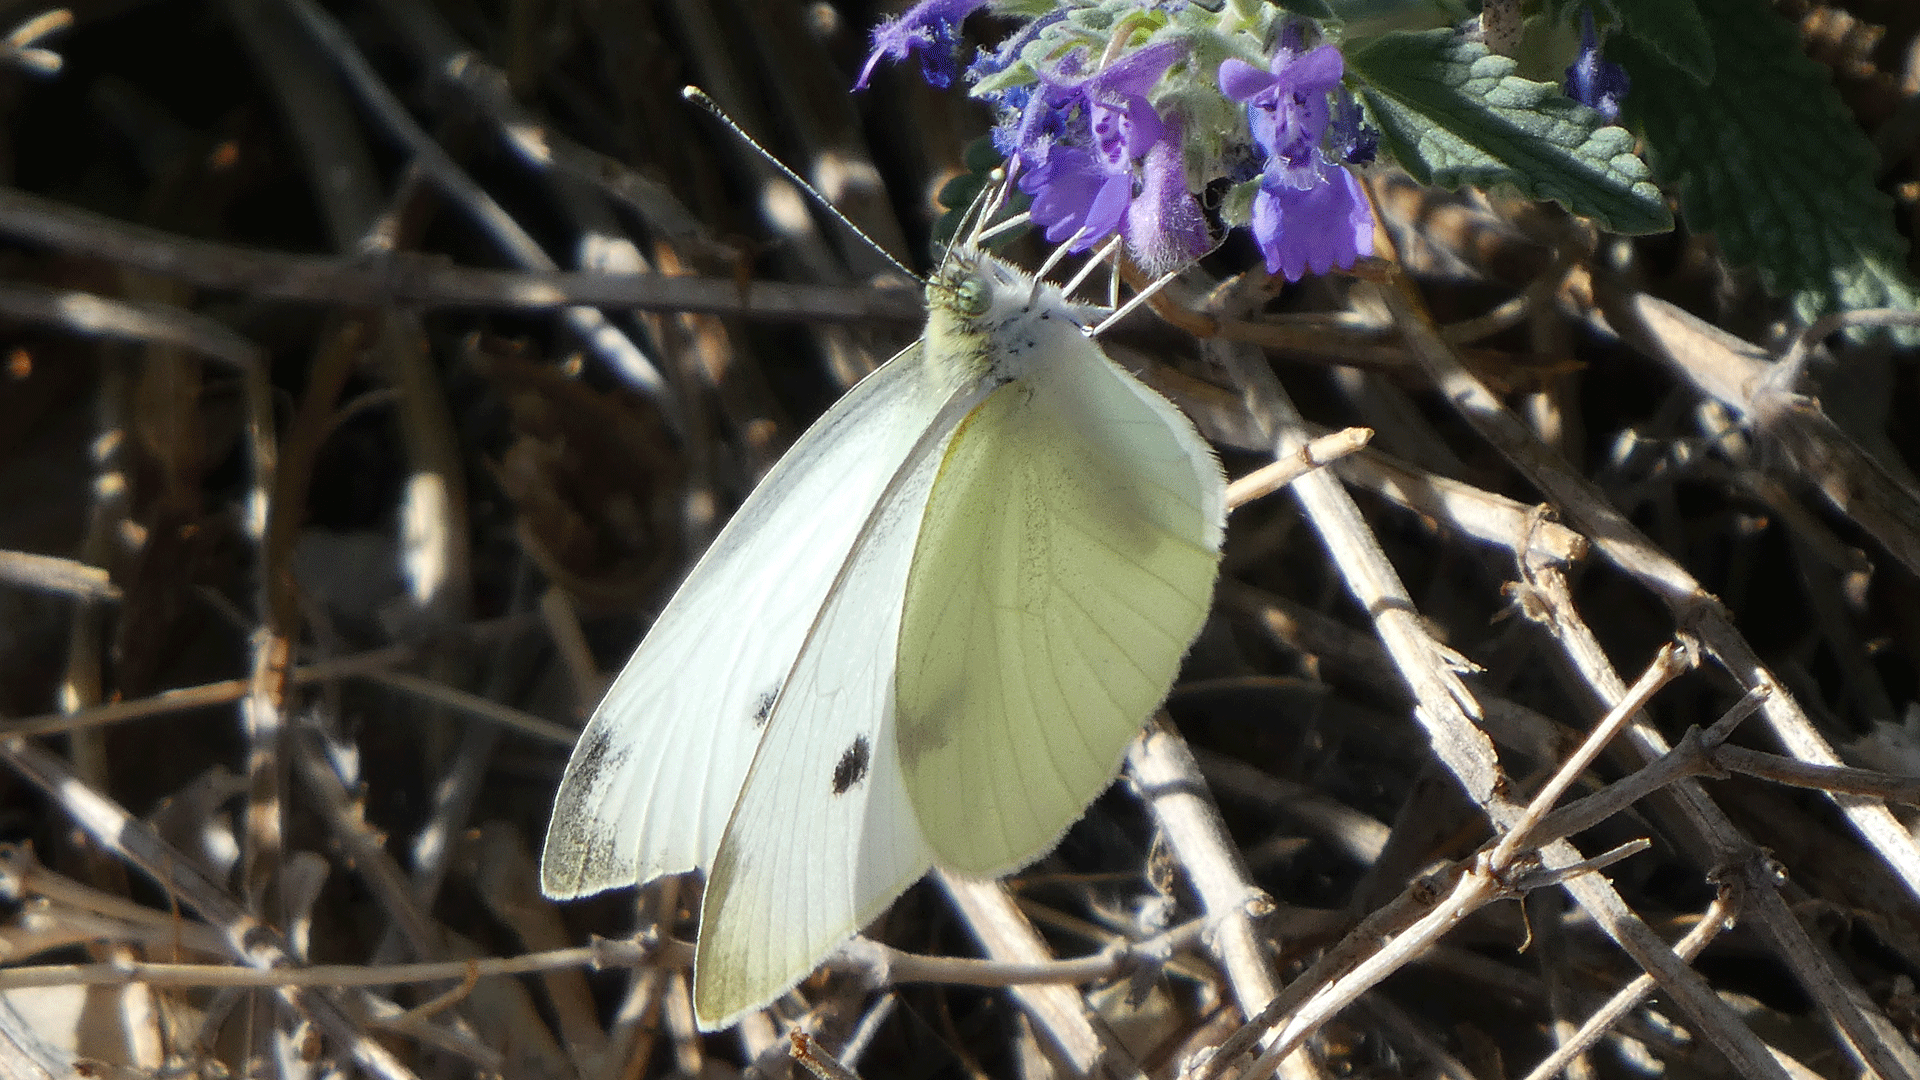 On Russian sage, Albuquerque, May 2020